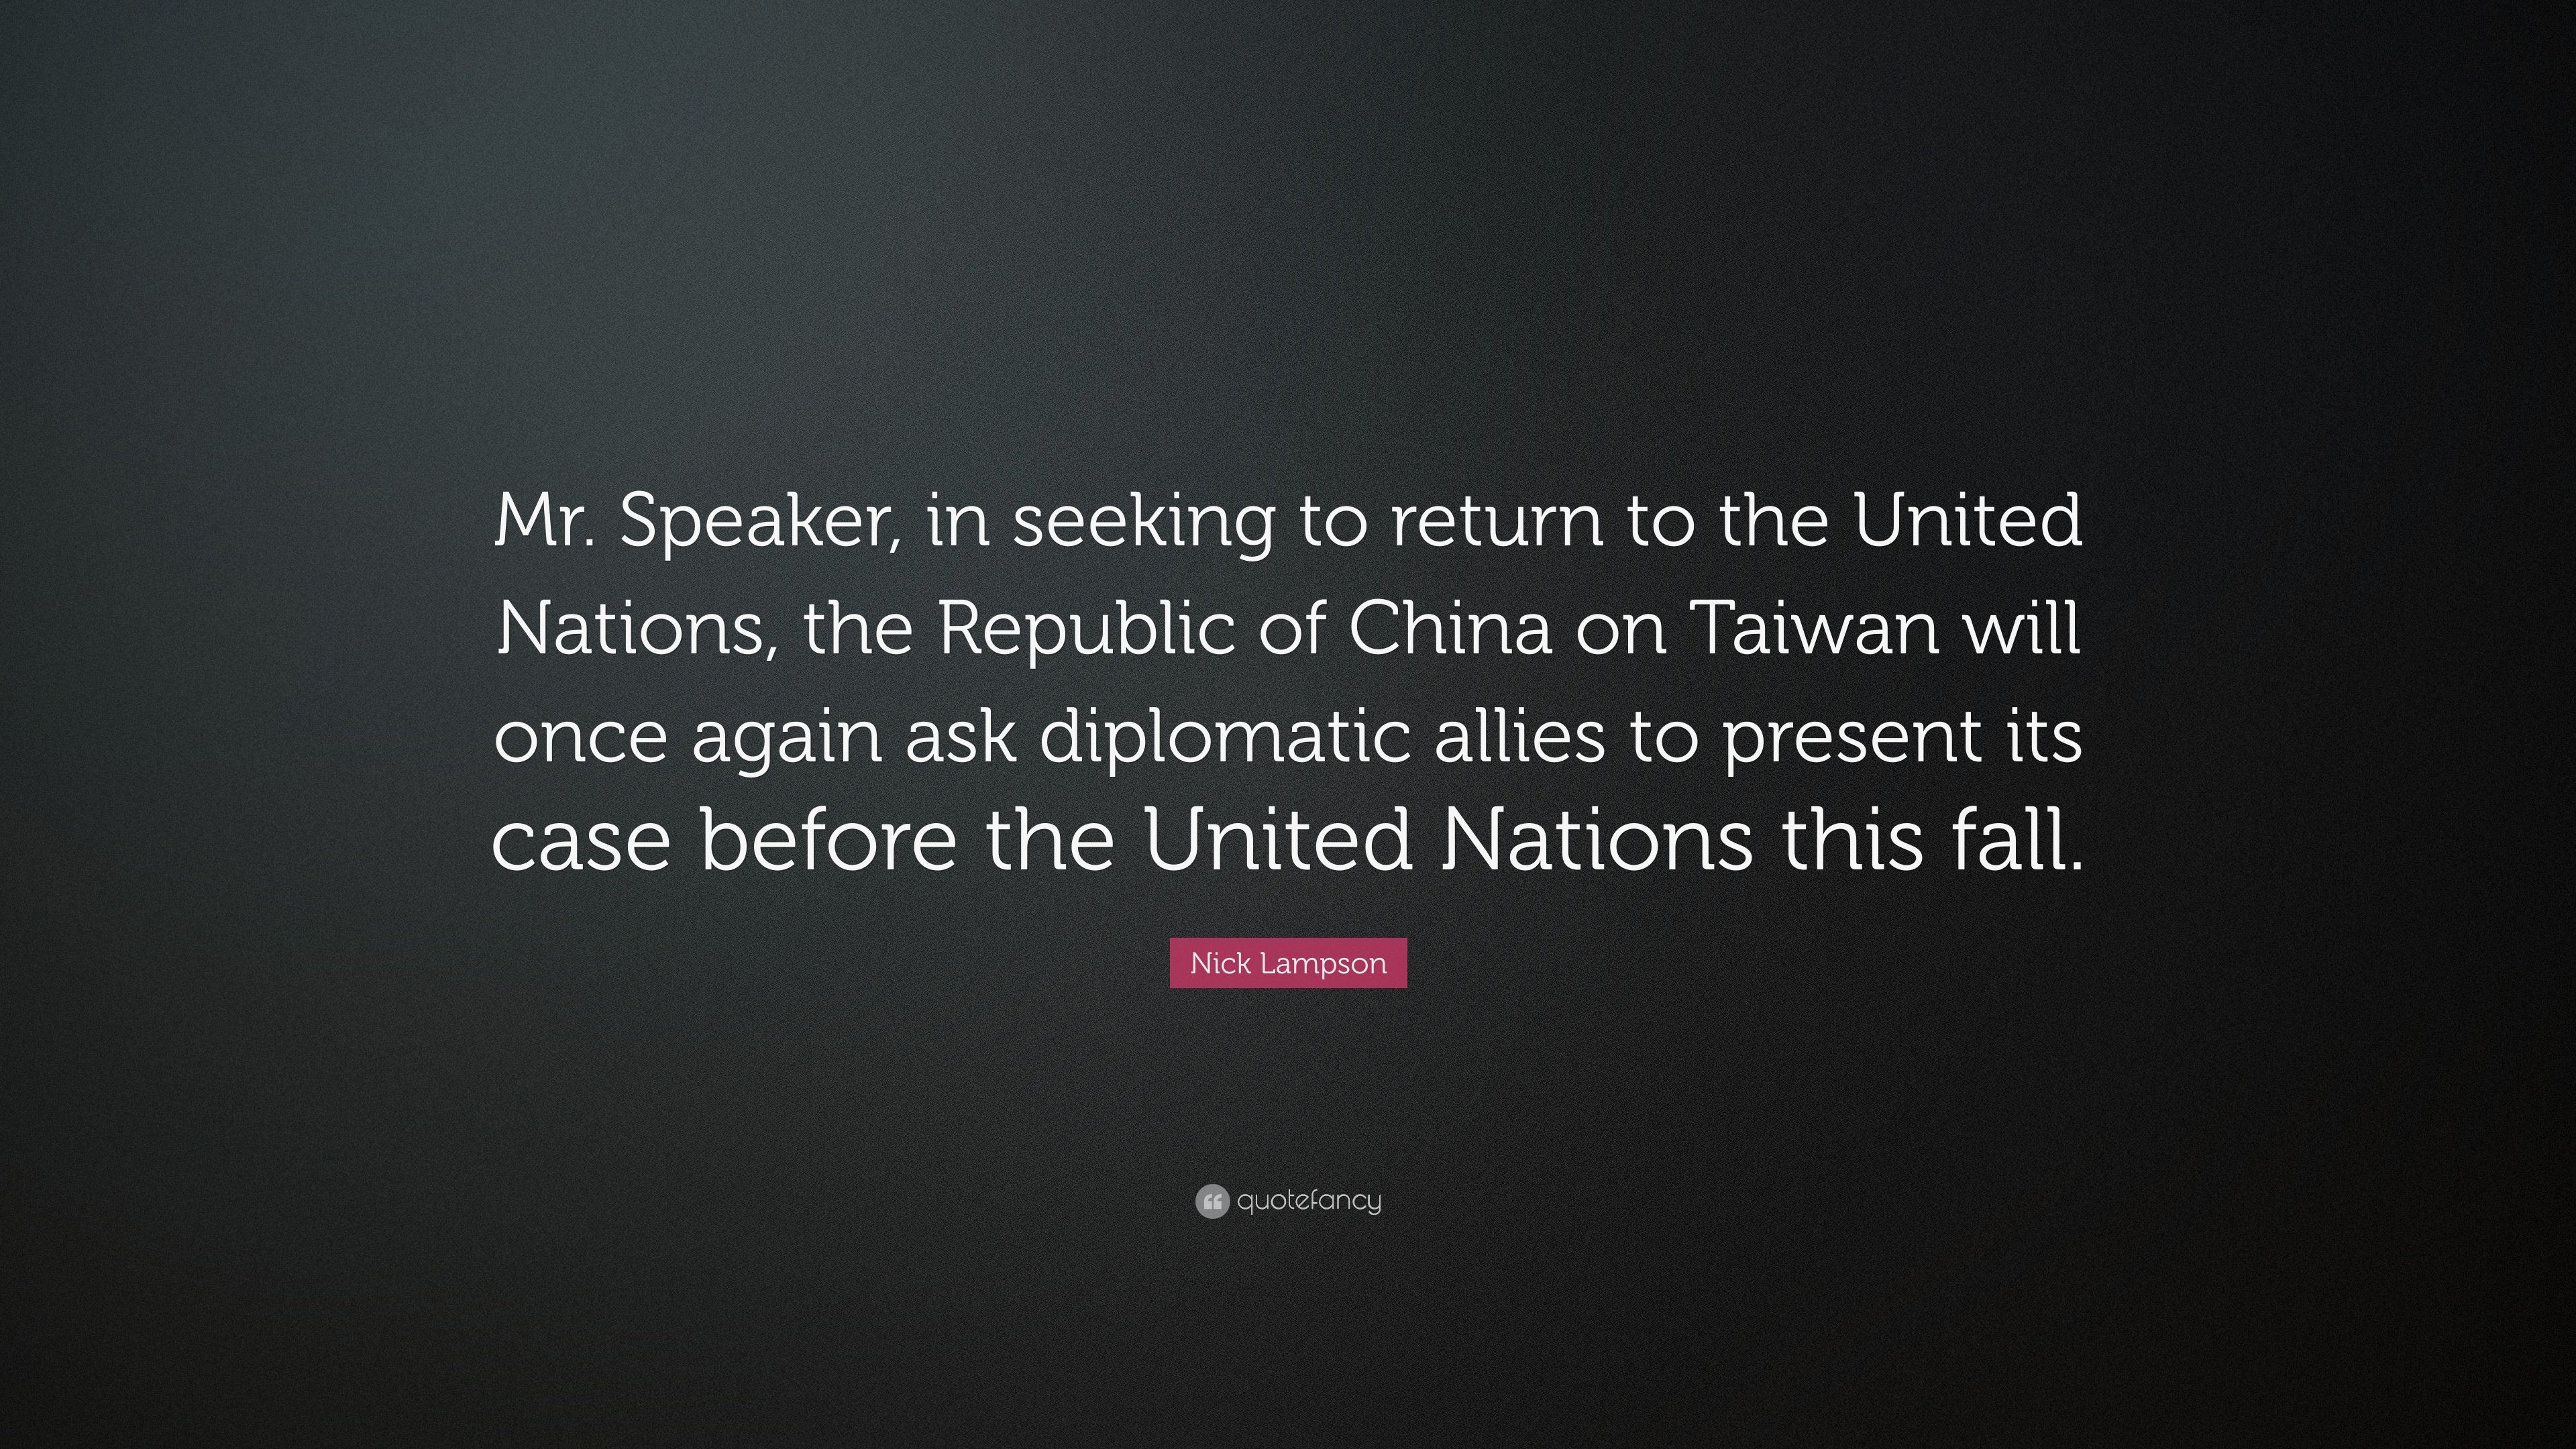 Nick Lampson Quote: “Mr. Speaker, in seeking to return to the United